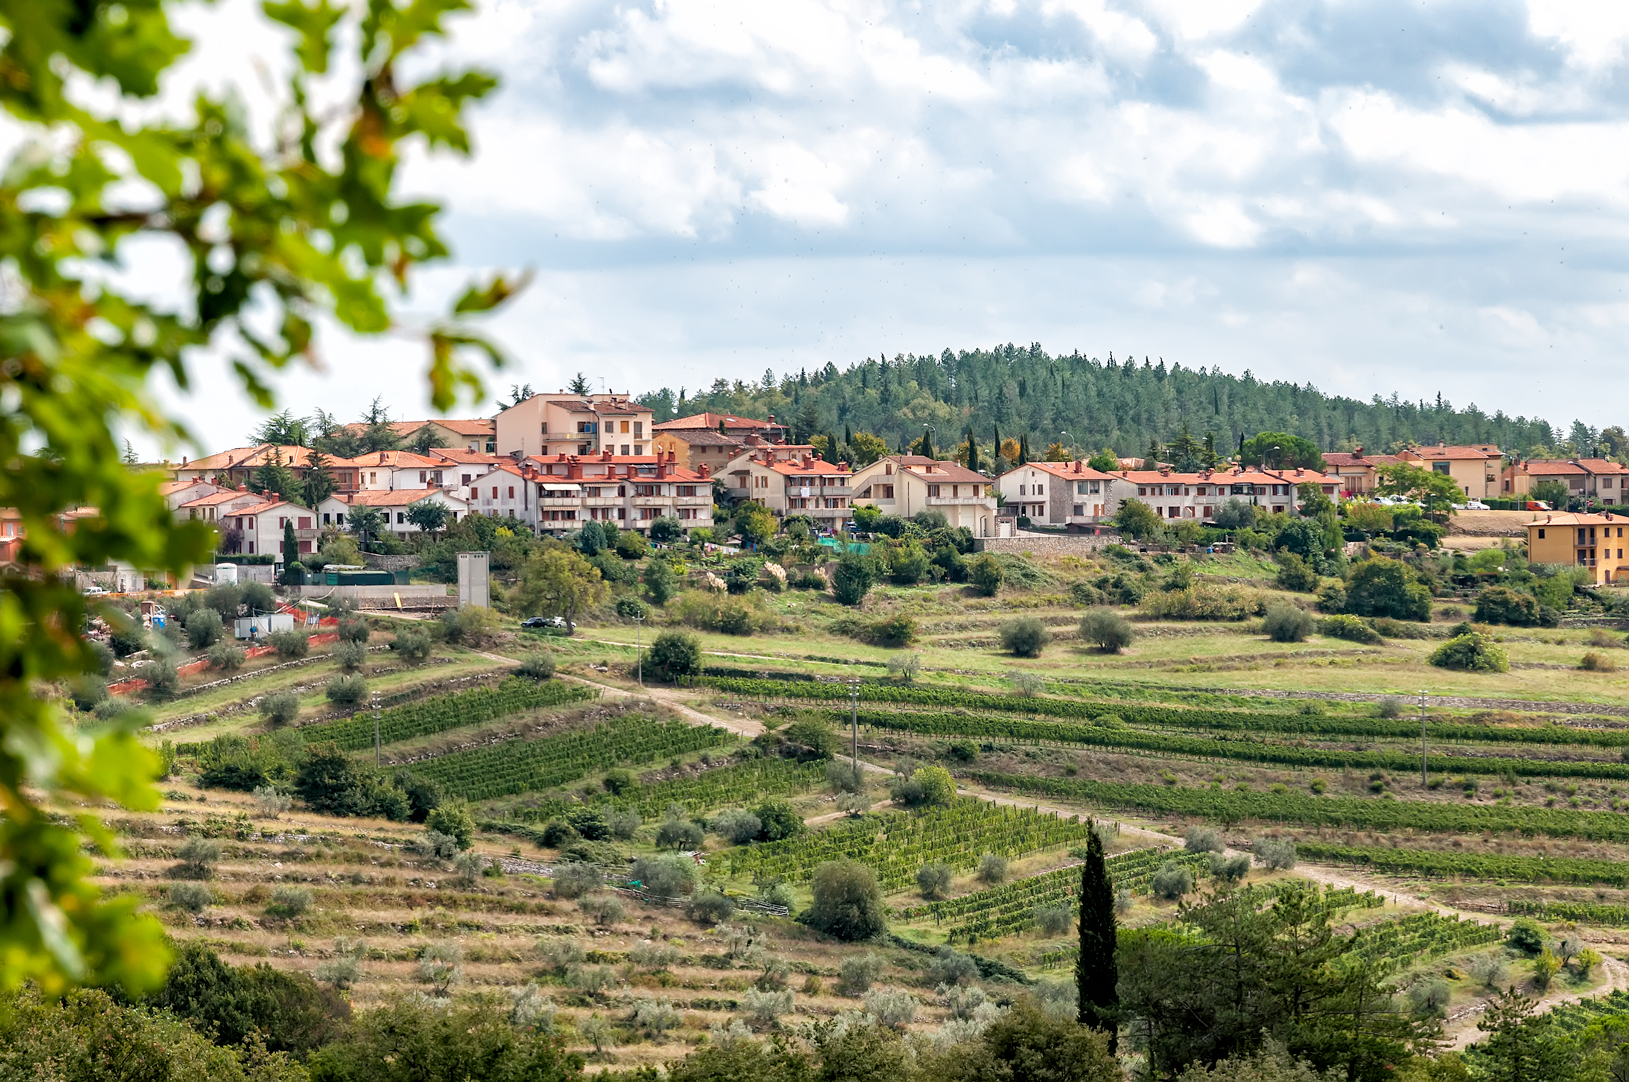 Castellina in Chianti from a distance